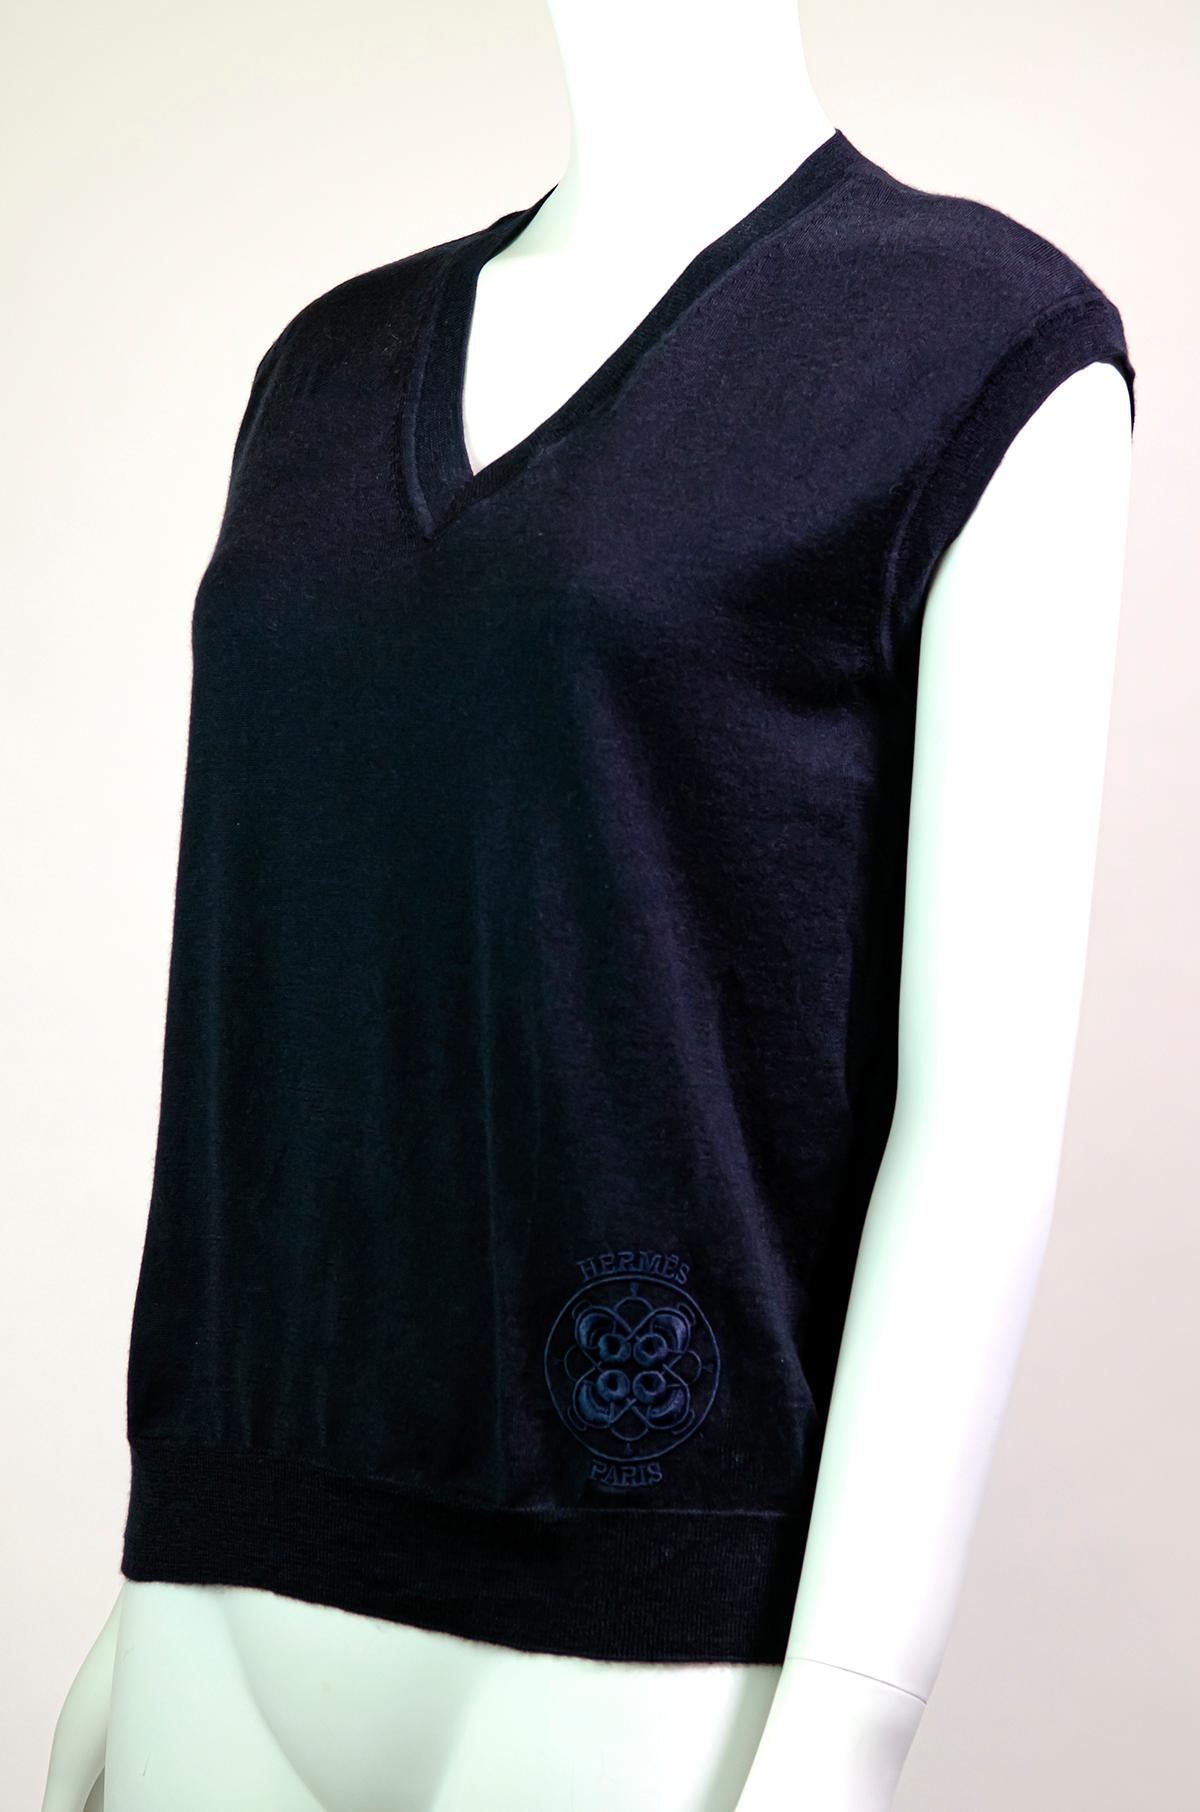 Stunning luxurious Hermès knitted sleeves V-neck sleeveless top - made in Italy from a silk and cashmere mix. Features a beautiful Hermès crest at the front left close to the hem. So elegant and easy to wear - perfect for every day. Wear it alone as